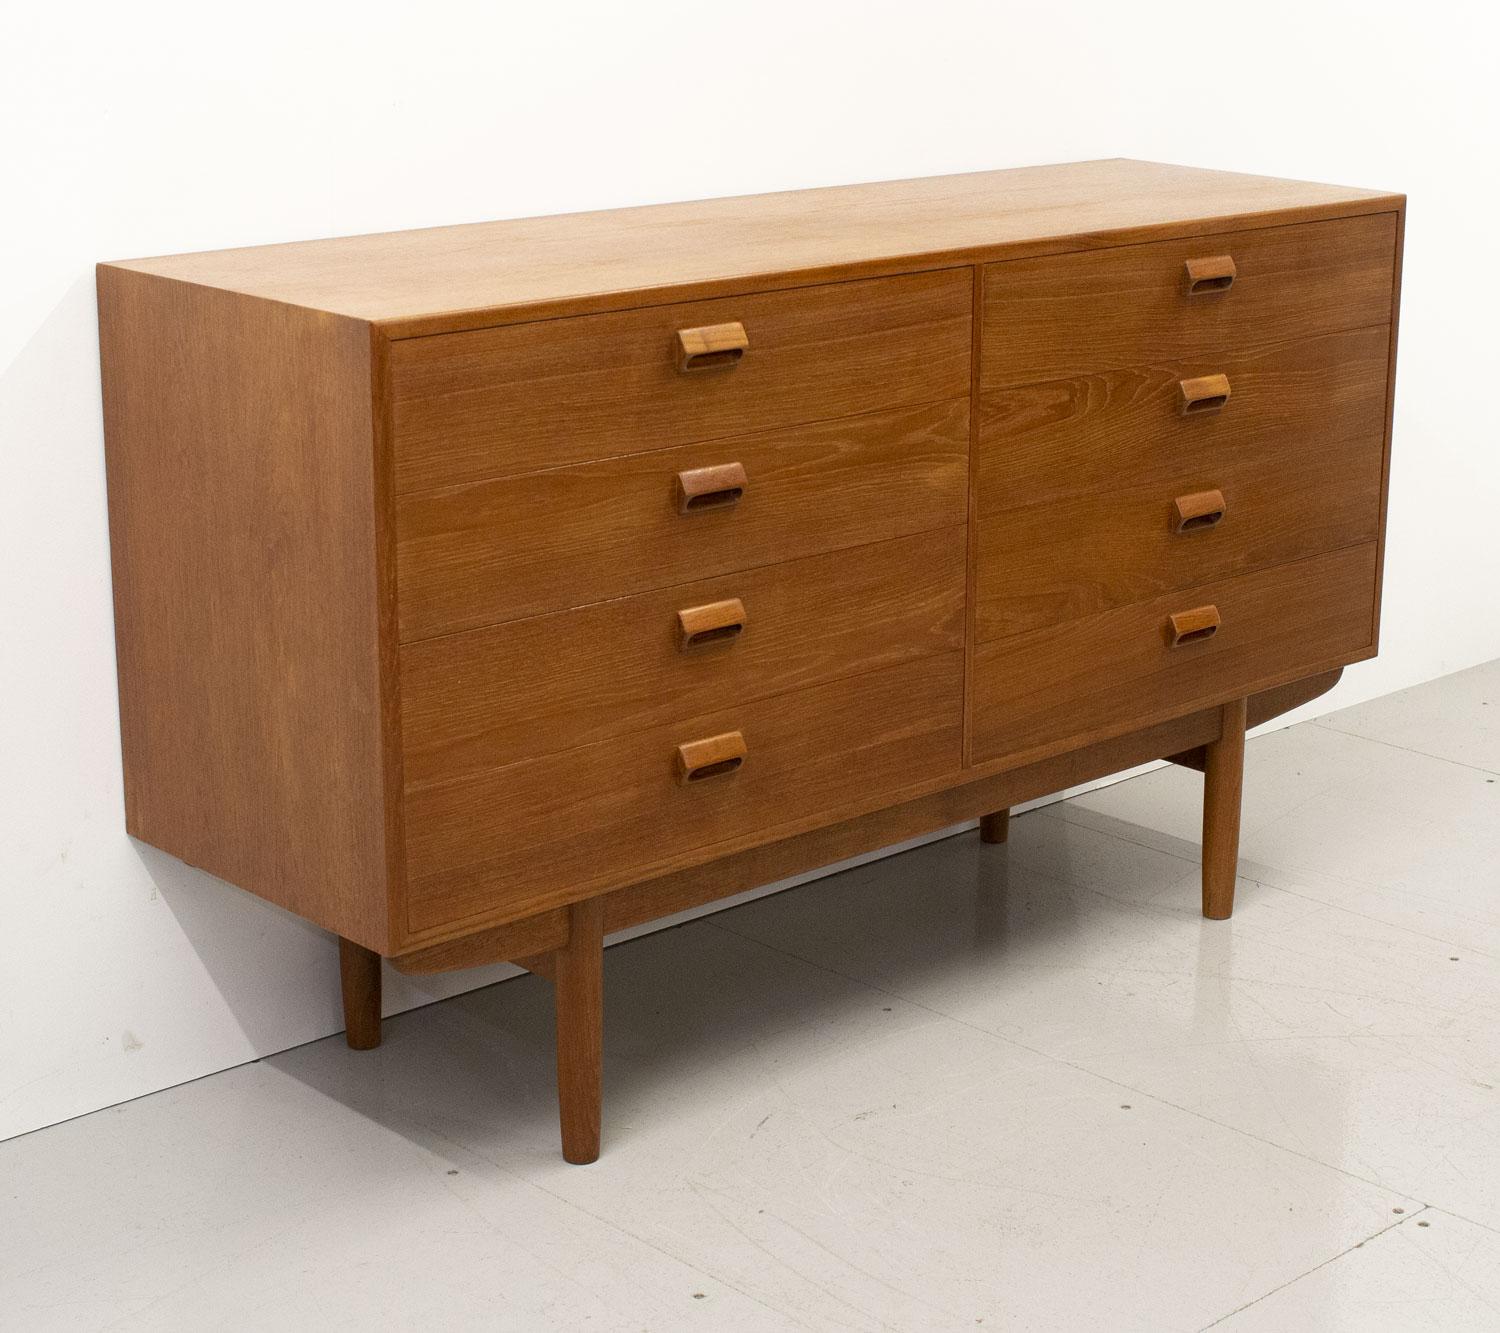 Danish Large Teak Chest of Drawers by Borge Mogensen for Soborg, 1950s For Sale 4